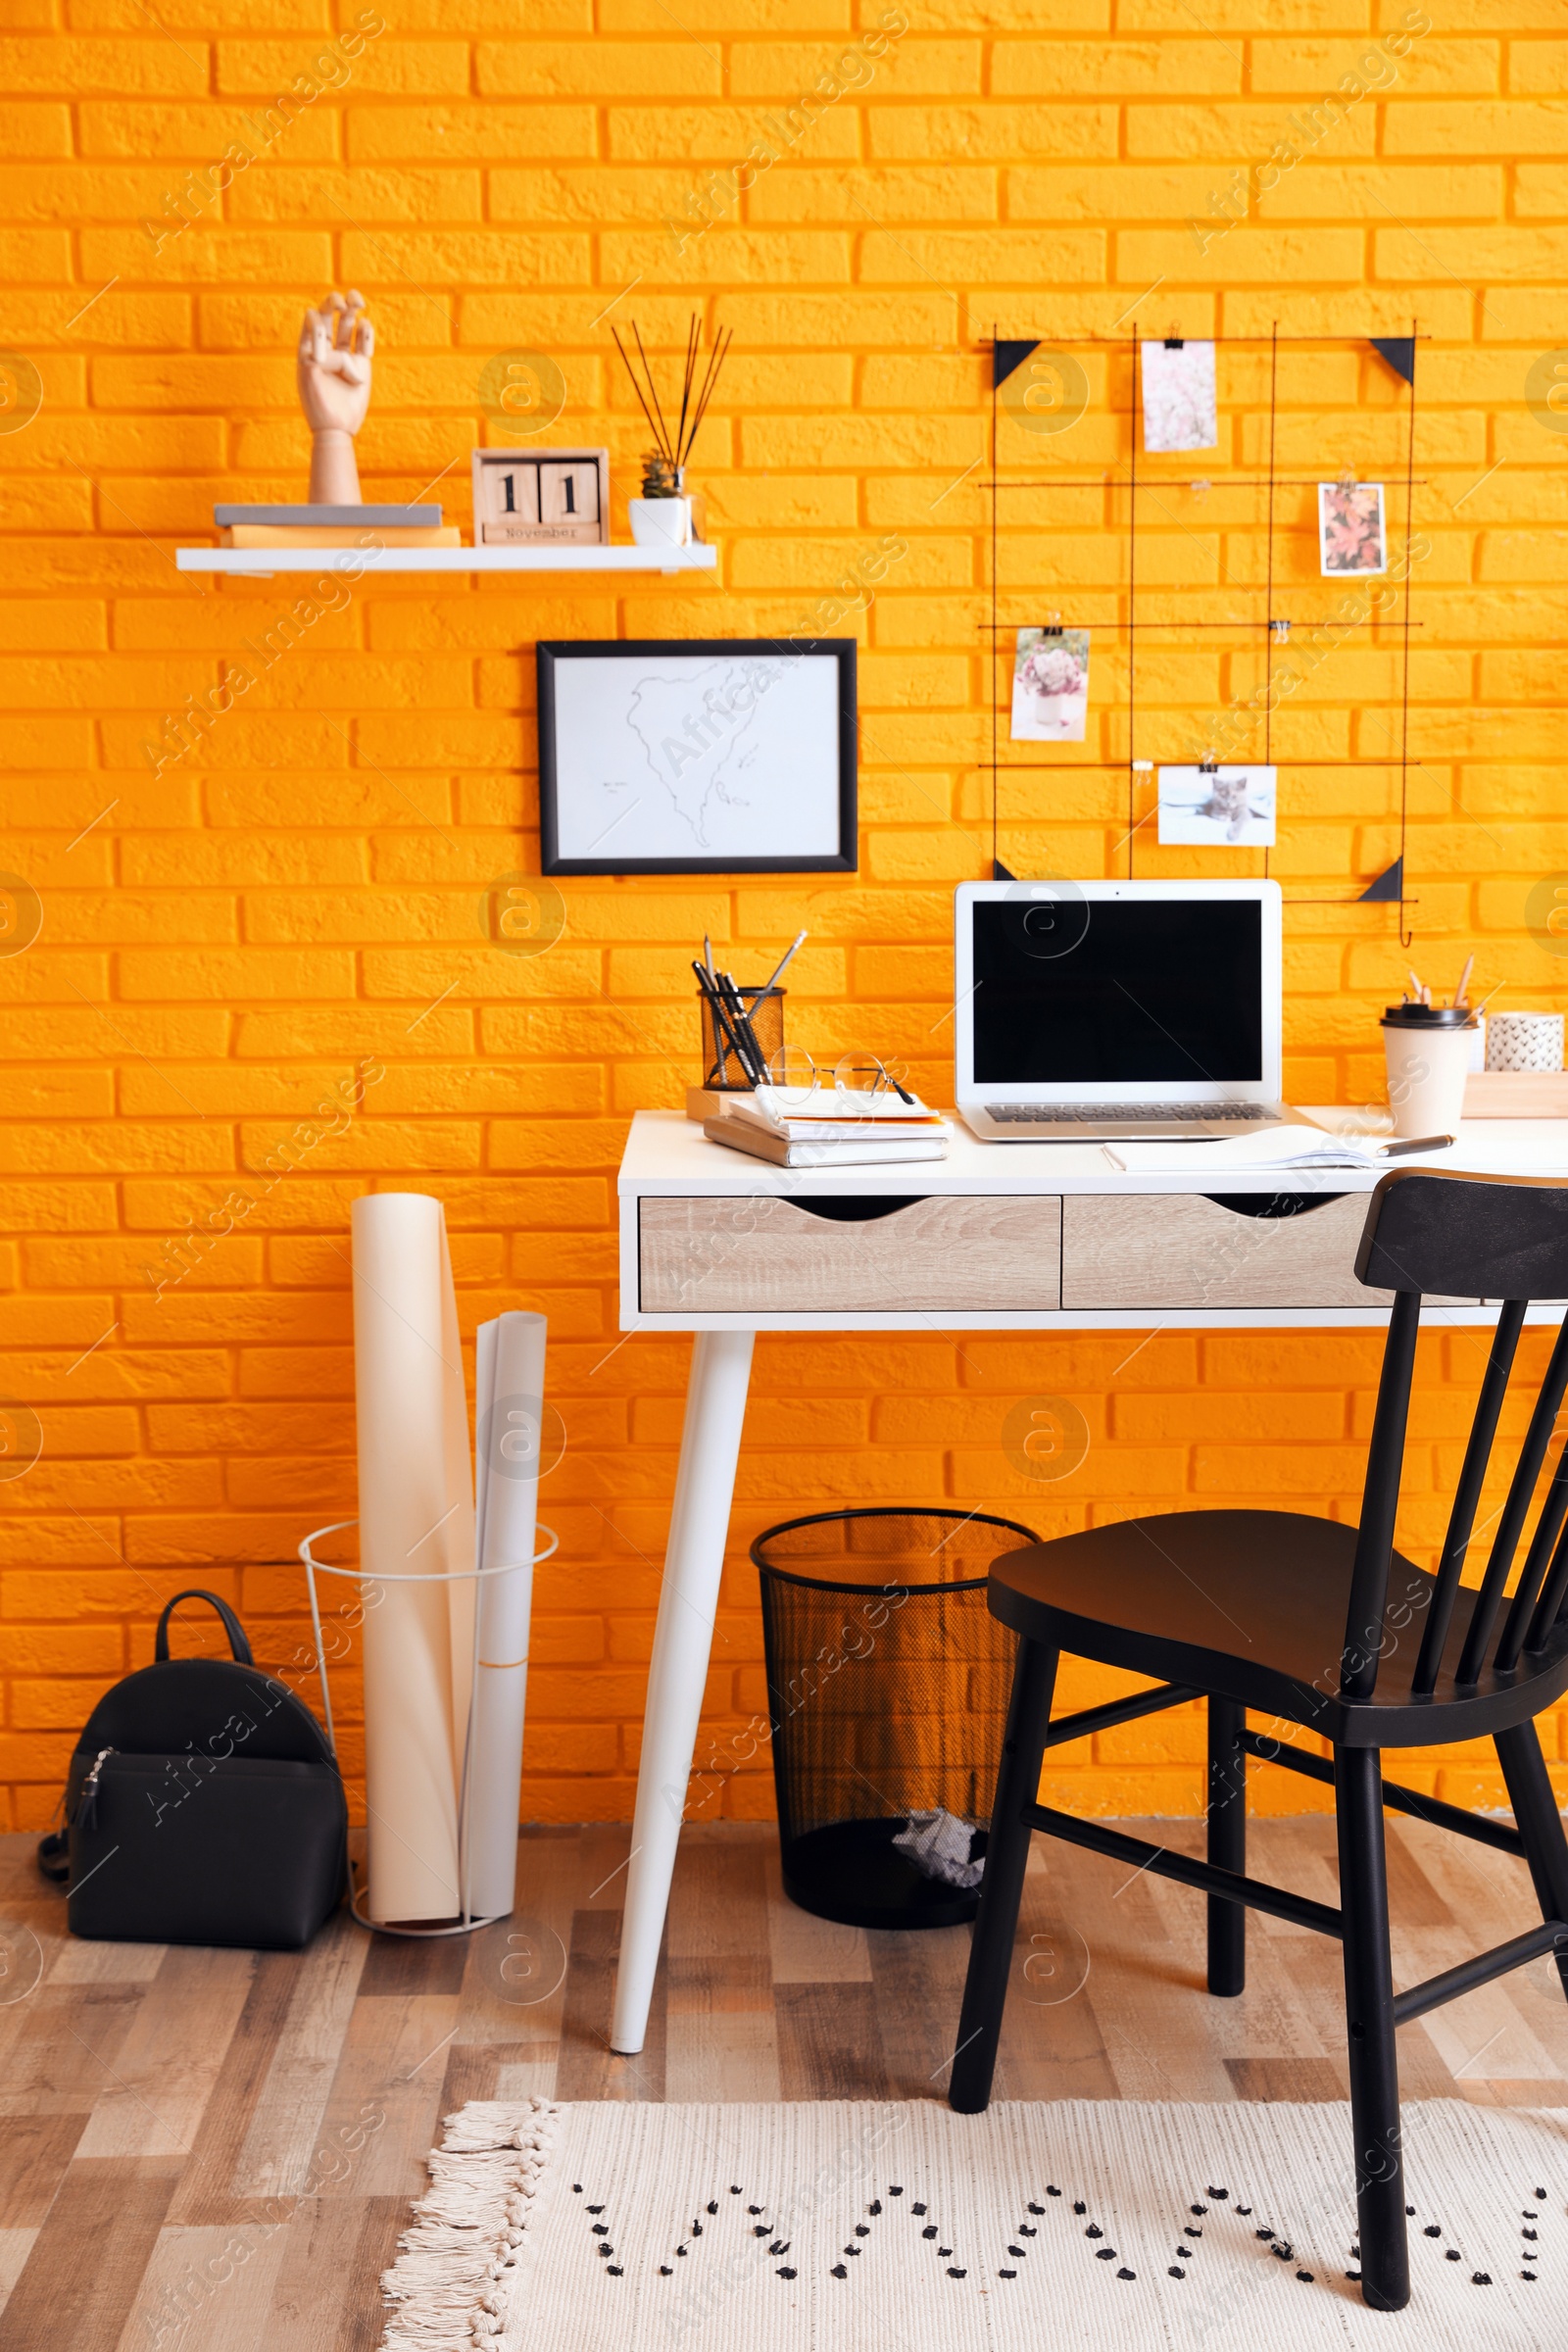 Image of Stylish home office interior with comfortable workplace near orange brick wall